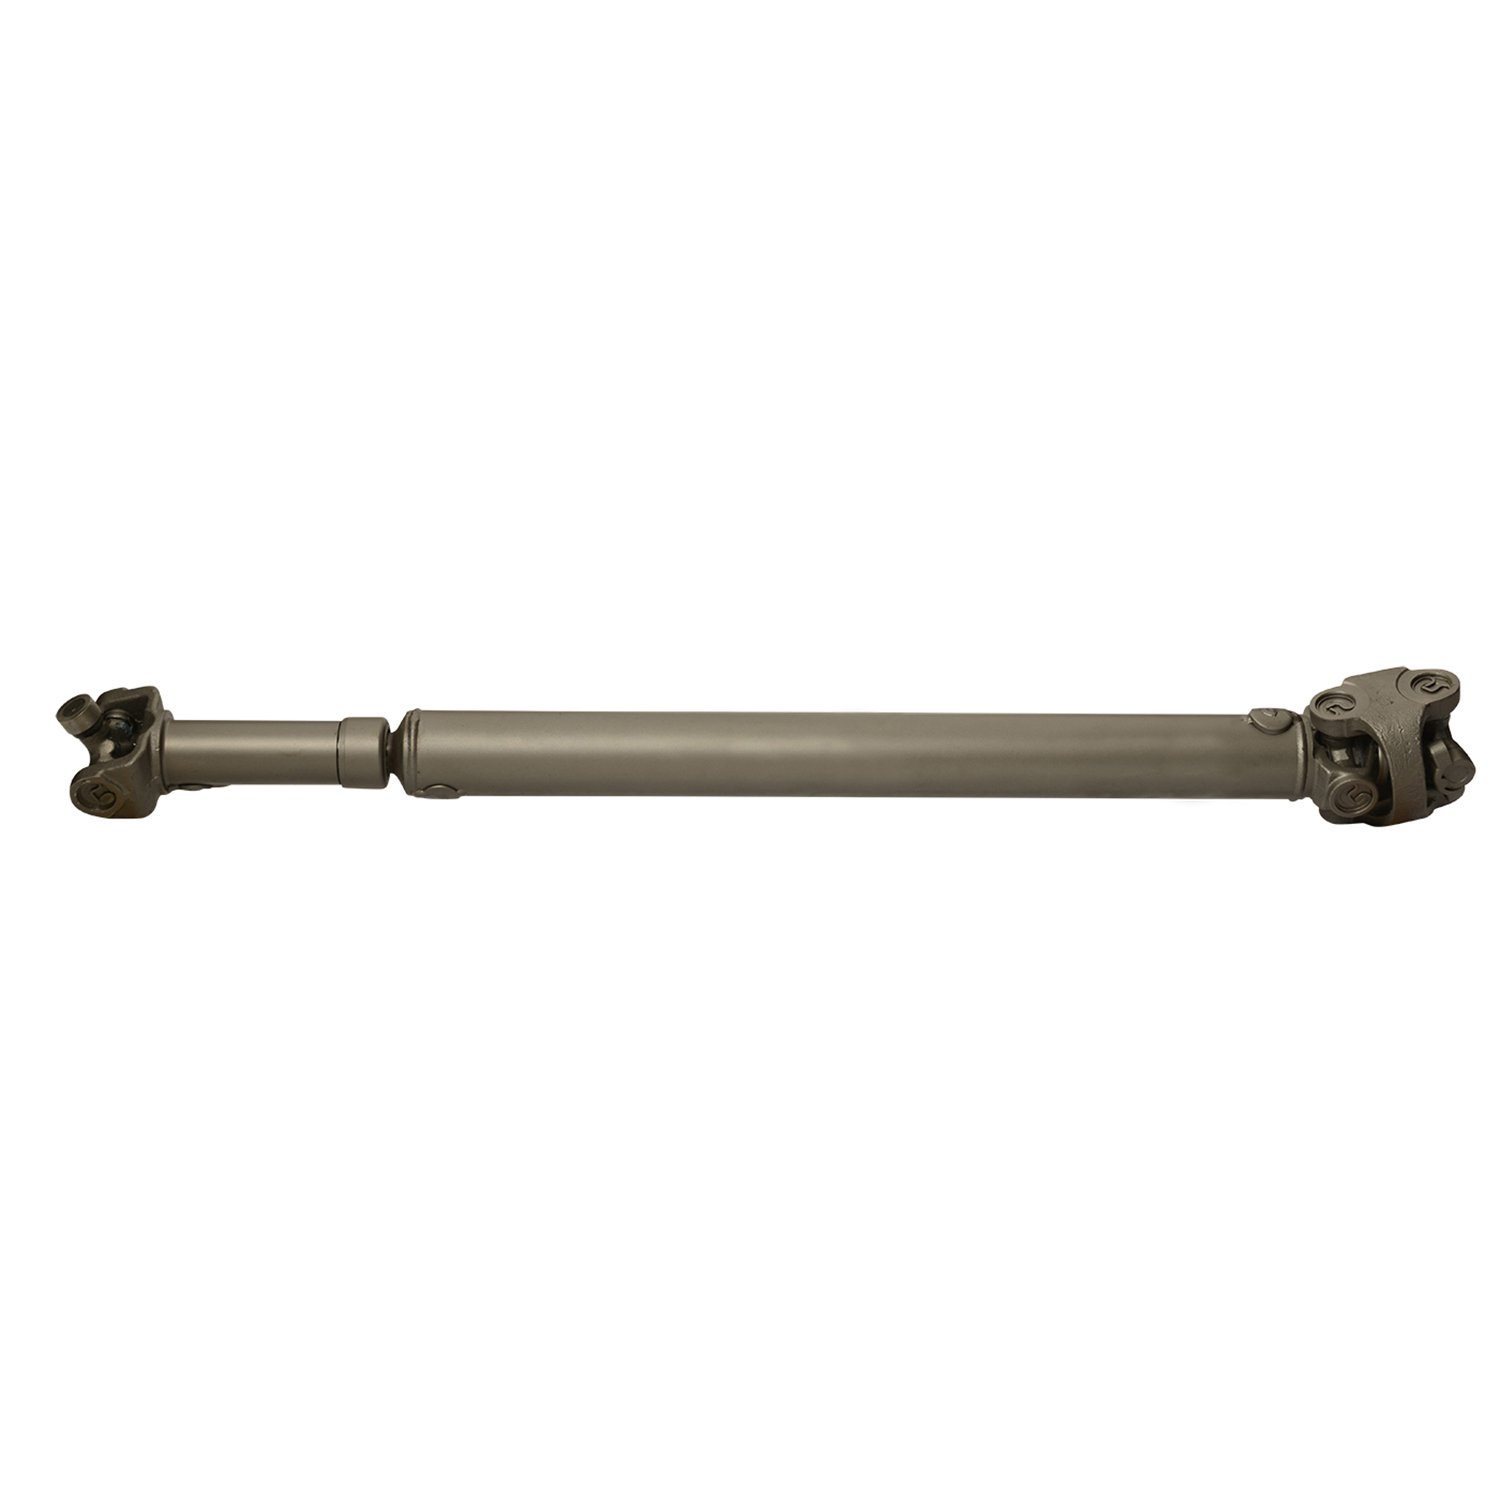 USA Standard ZDS9184 Front Driveshaft, For F250, 23-3/4 in. Center-To-Center